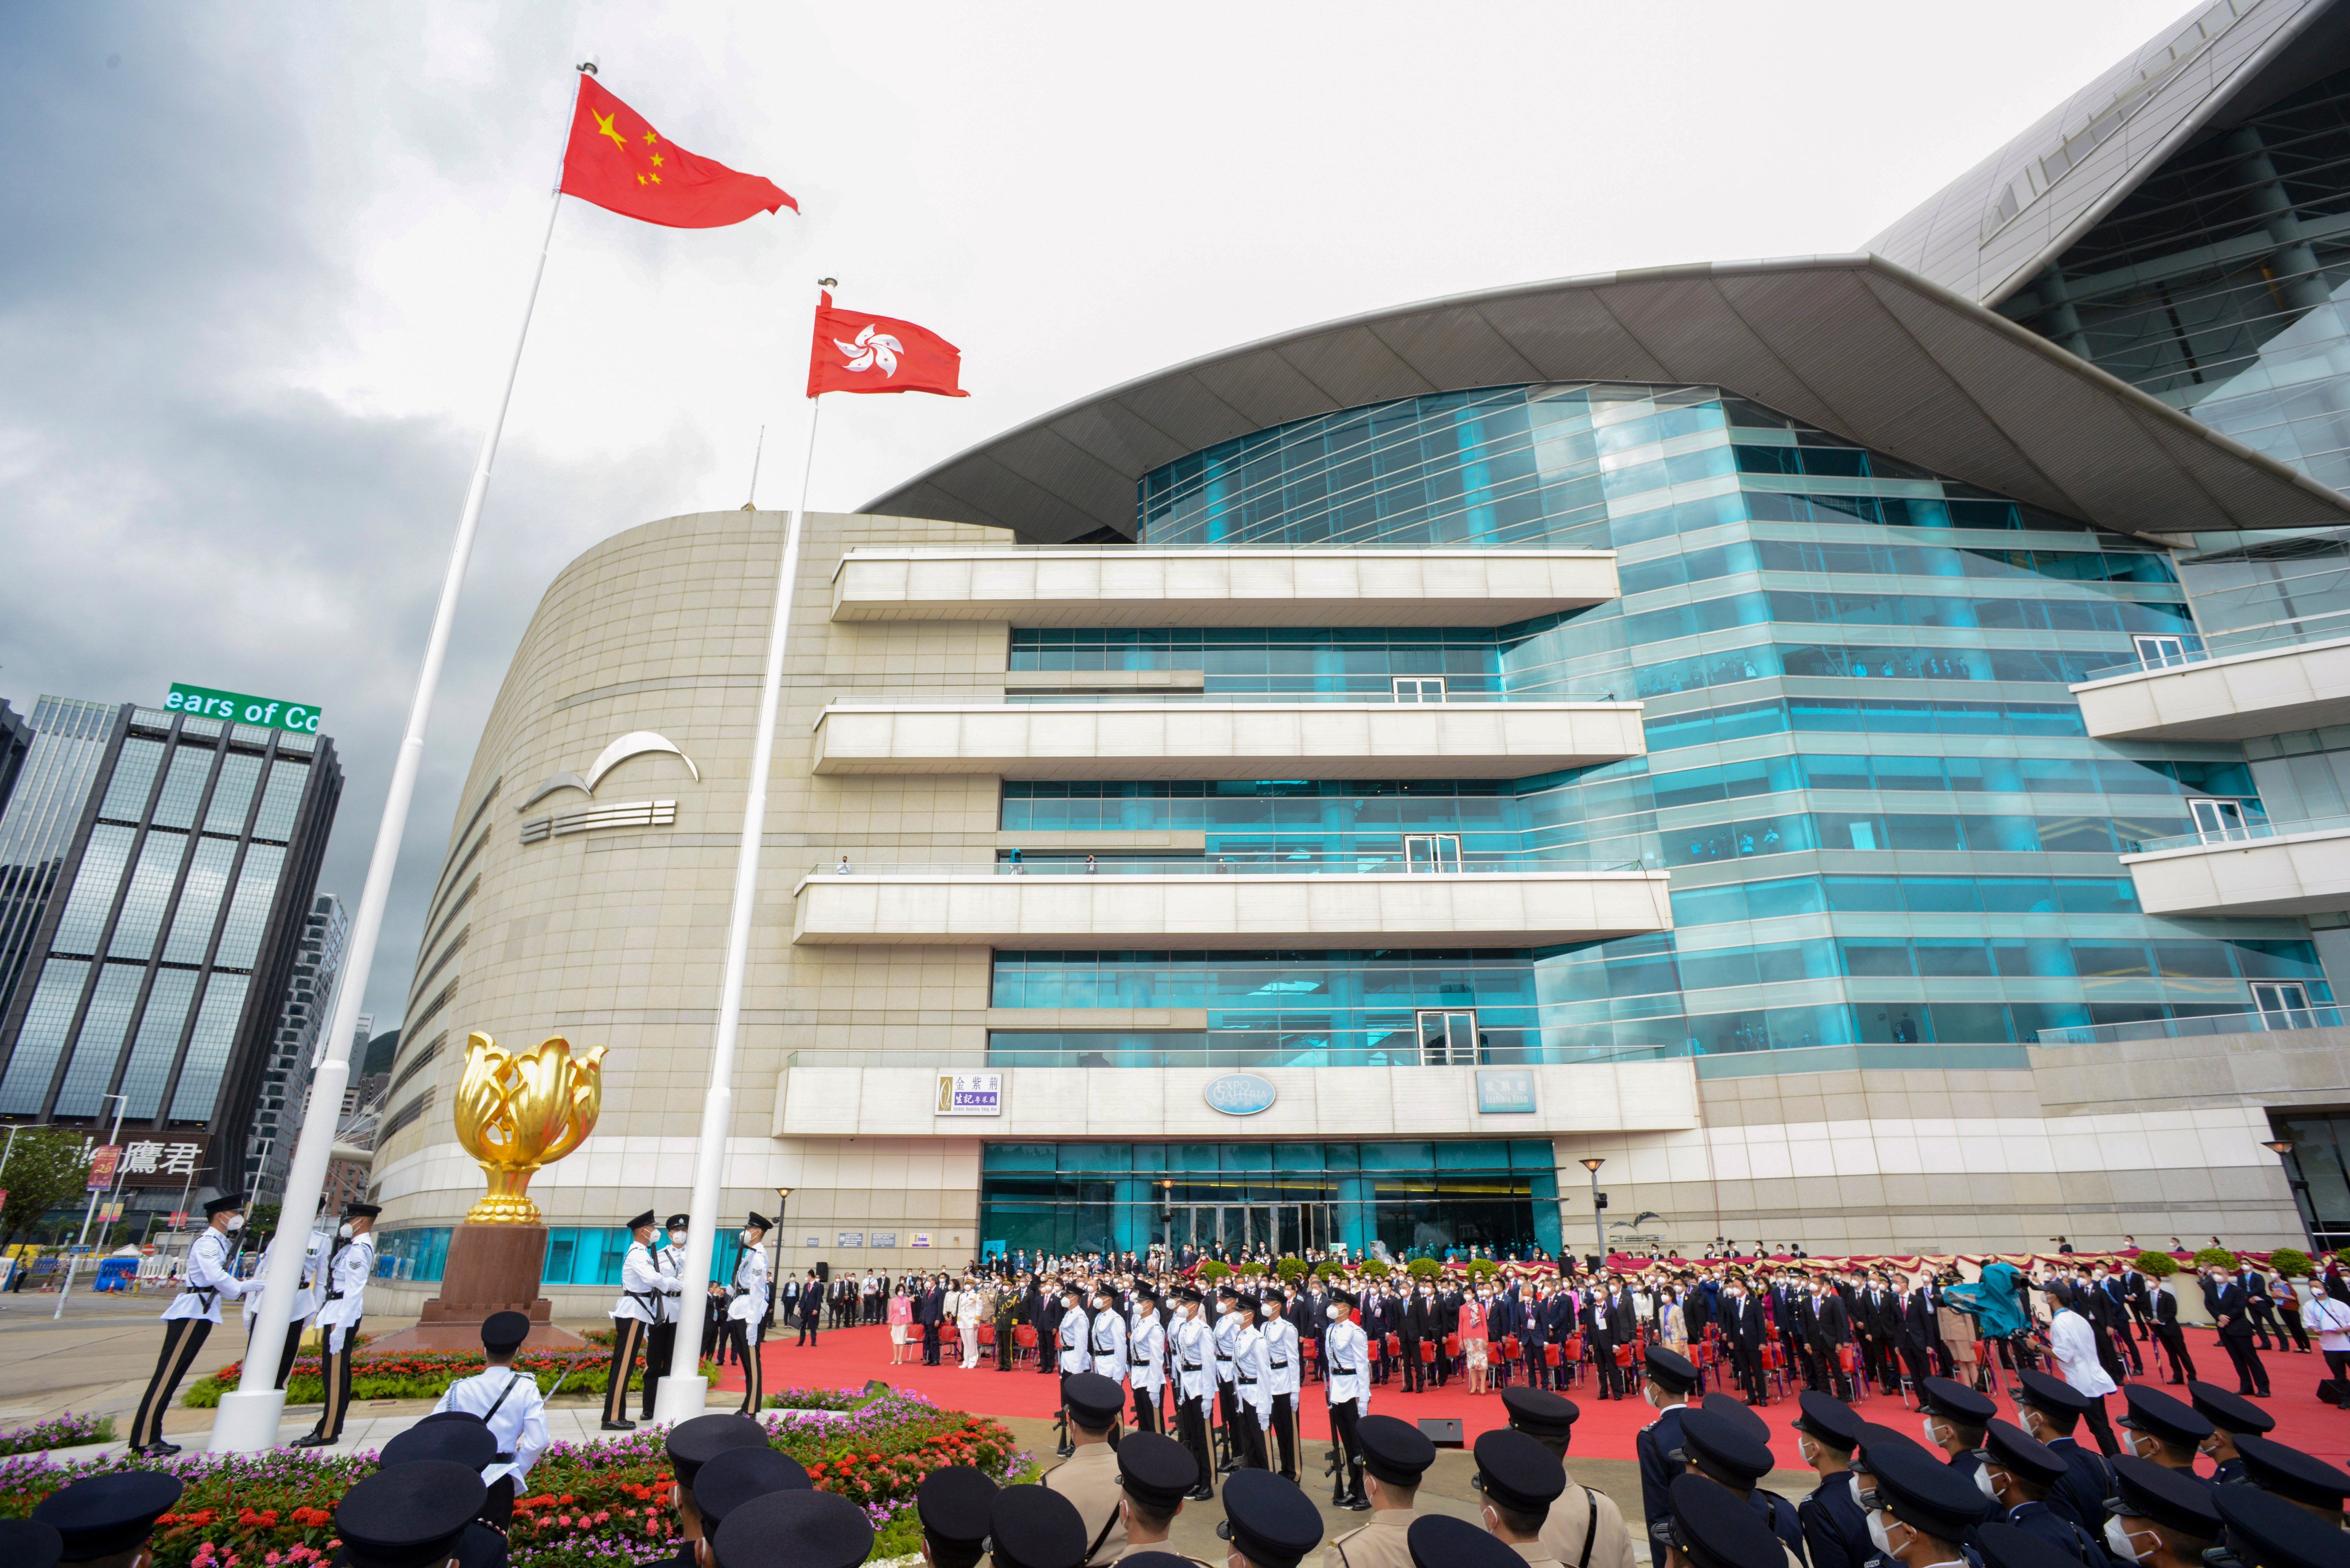 The flag-raising ceremony to celebrate the 25th anniversary of the establishment of the Hong Kong SAR, at Golden Bauhinia Square on July 1. Photo: Information Services Department of the Hong Kong government